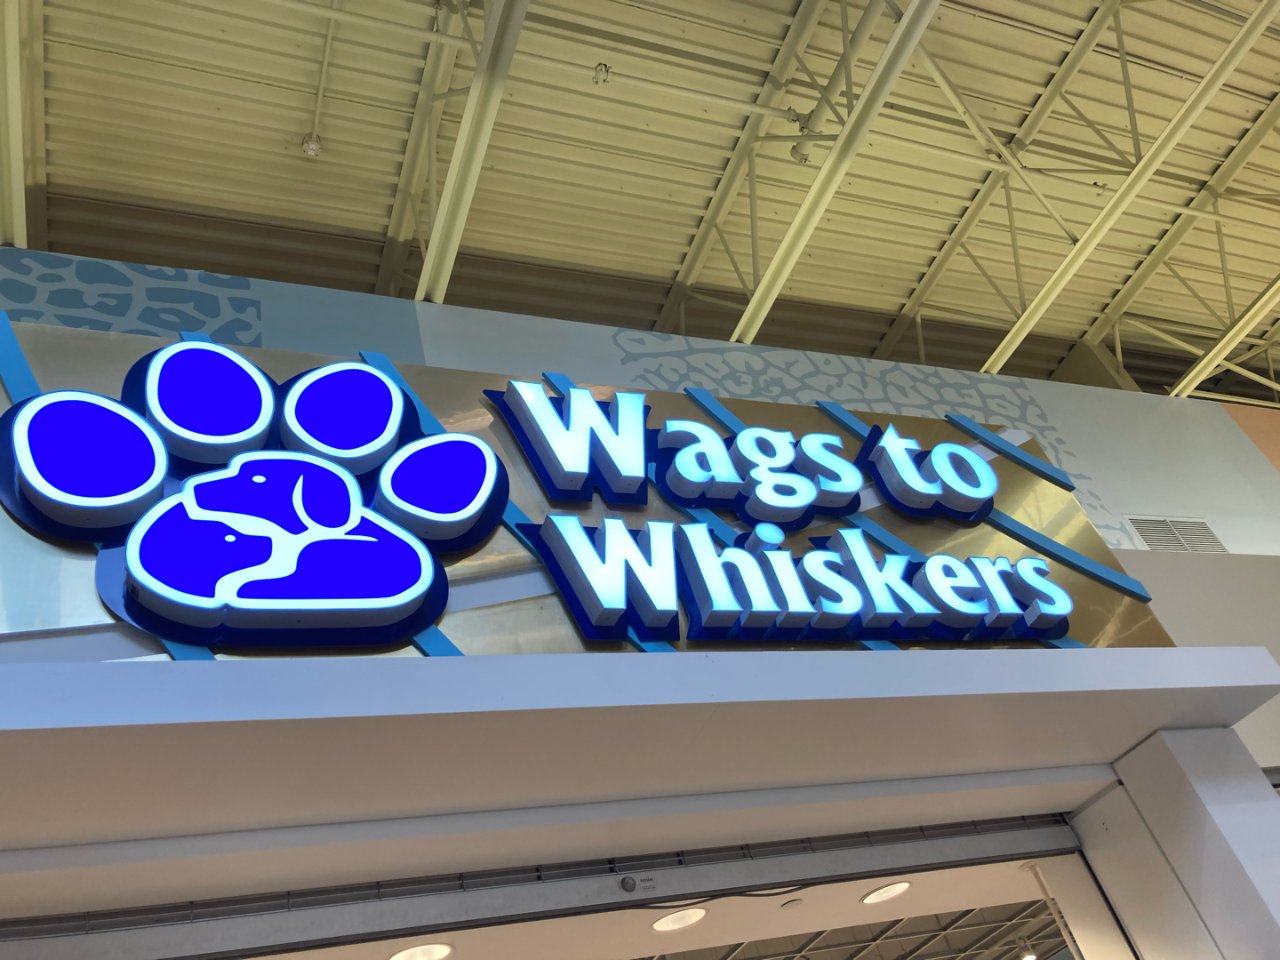 Wags to Whiskers探店...